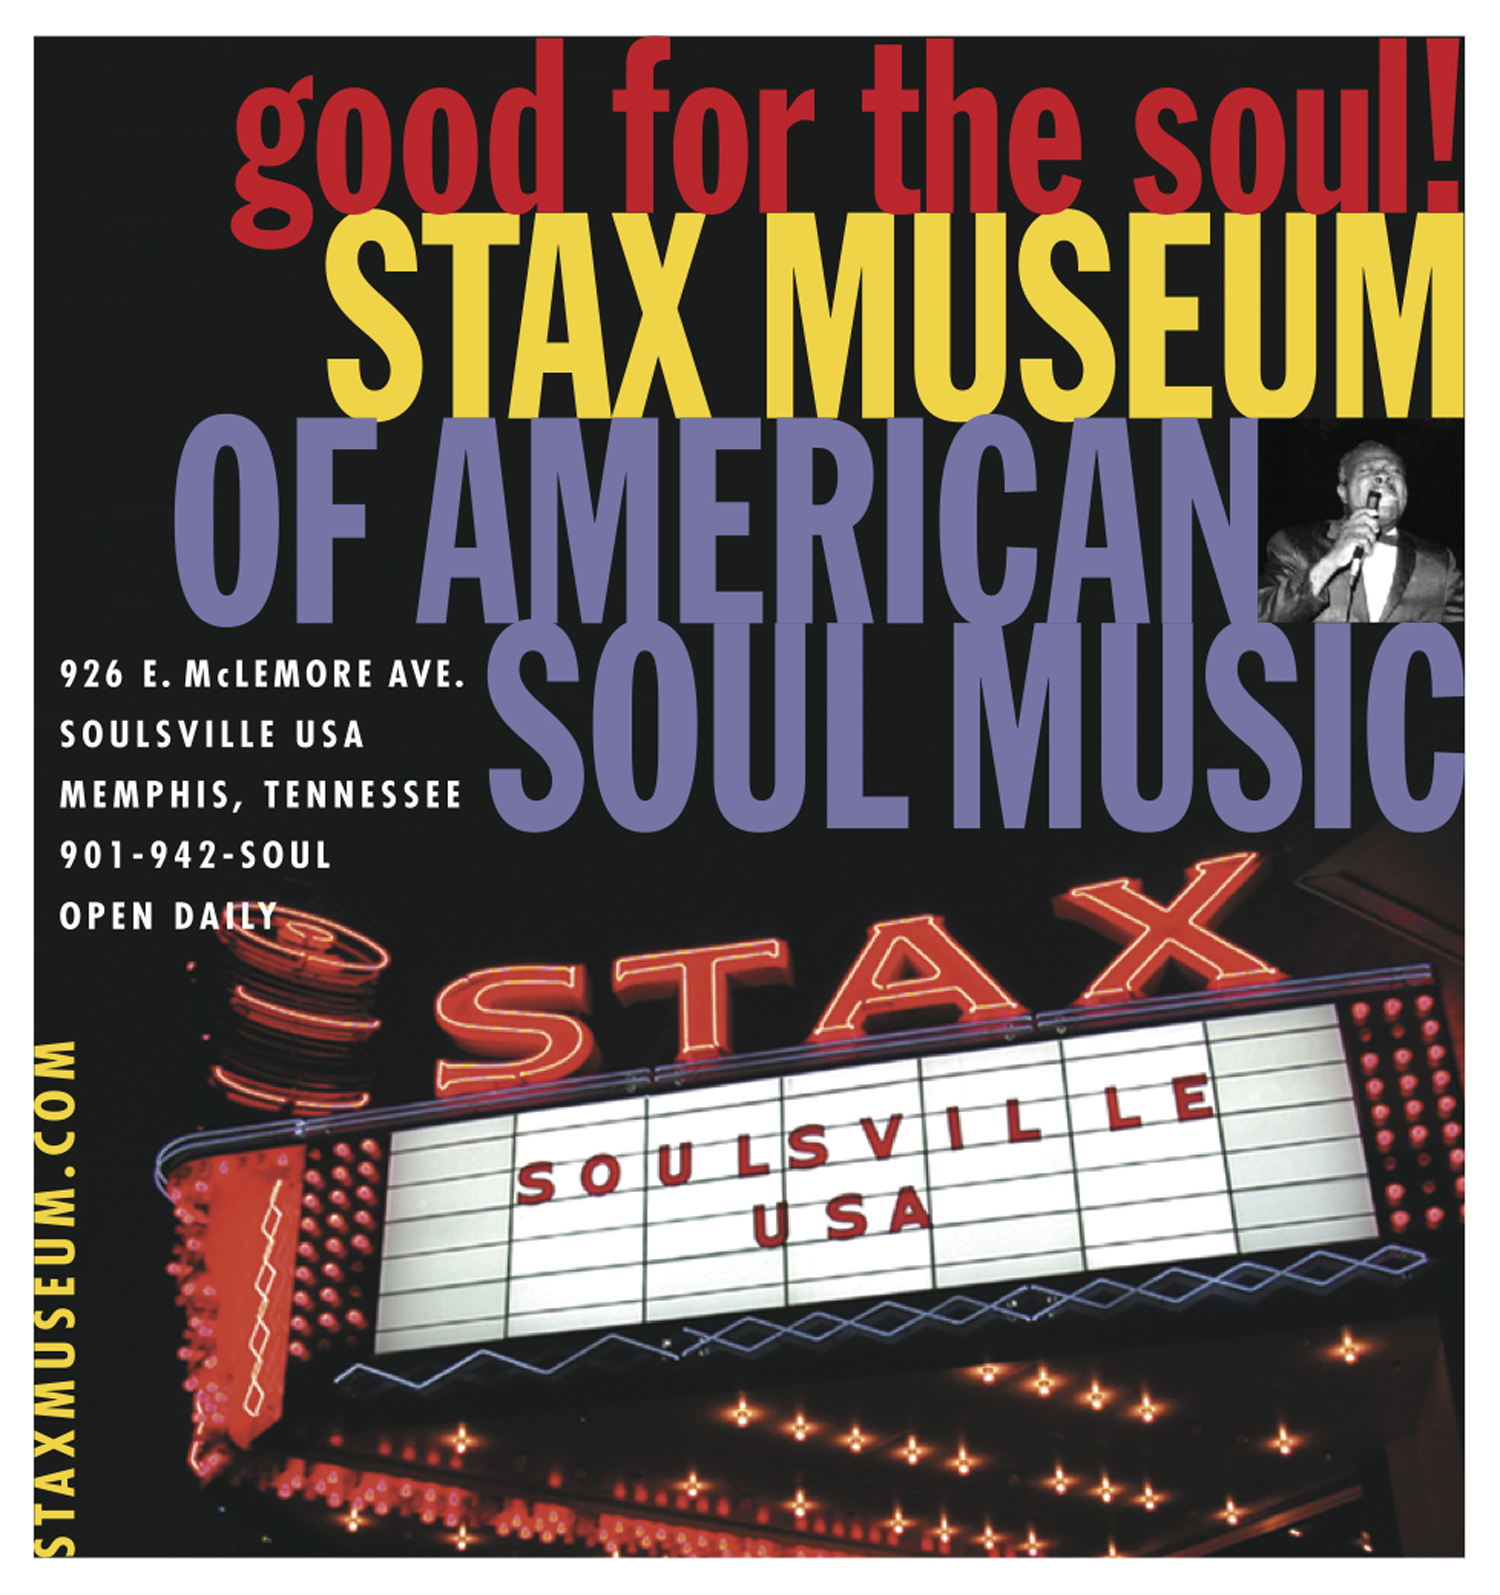  STAX small space magazine ad  Branding creative, ad copy and design by Chuck Mitchell 